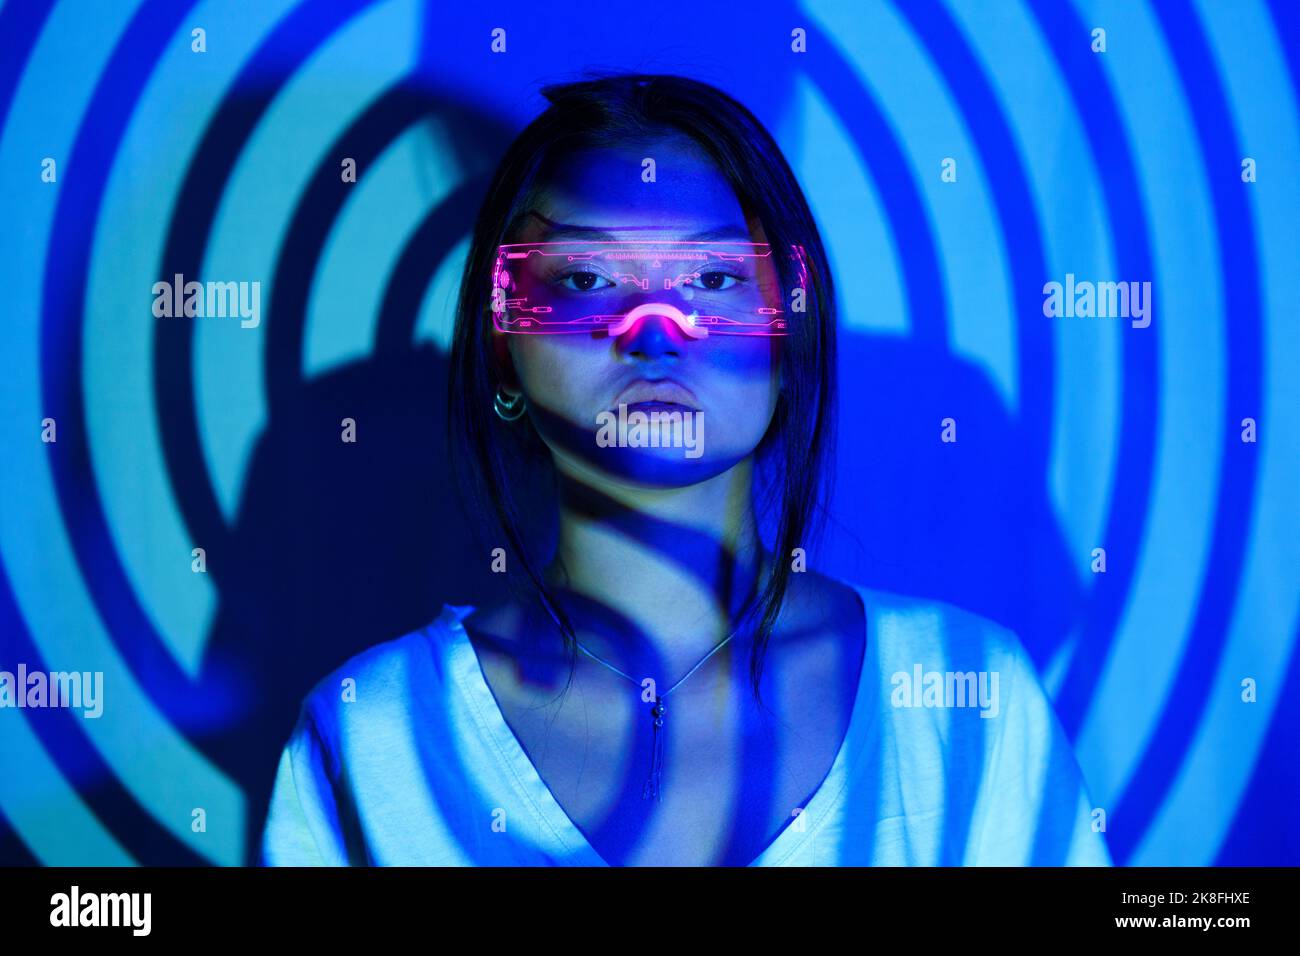 Spiral shadow on young woman wearing LED futuristic glasses Stock Photo